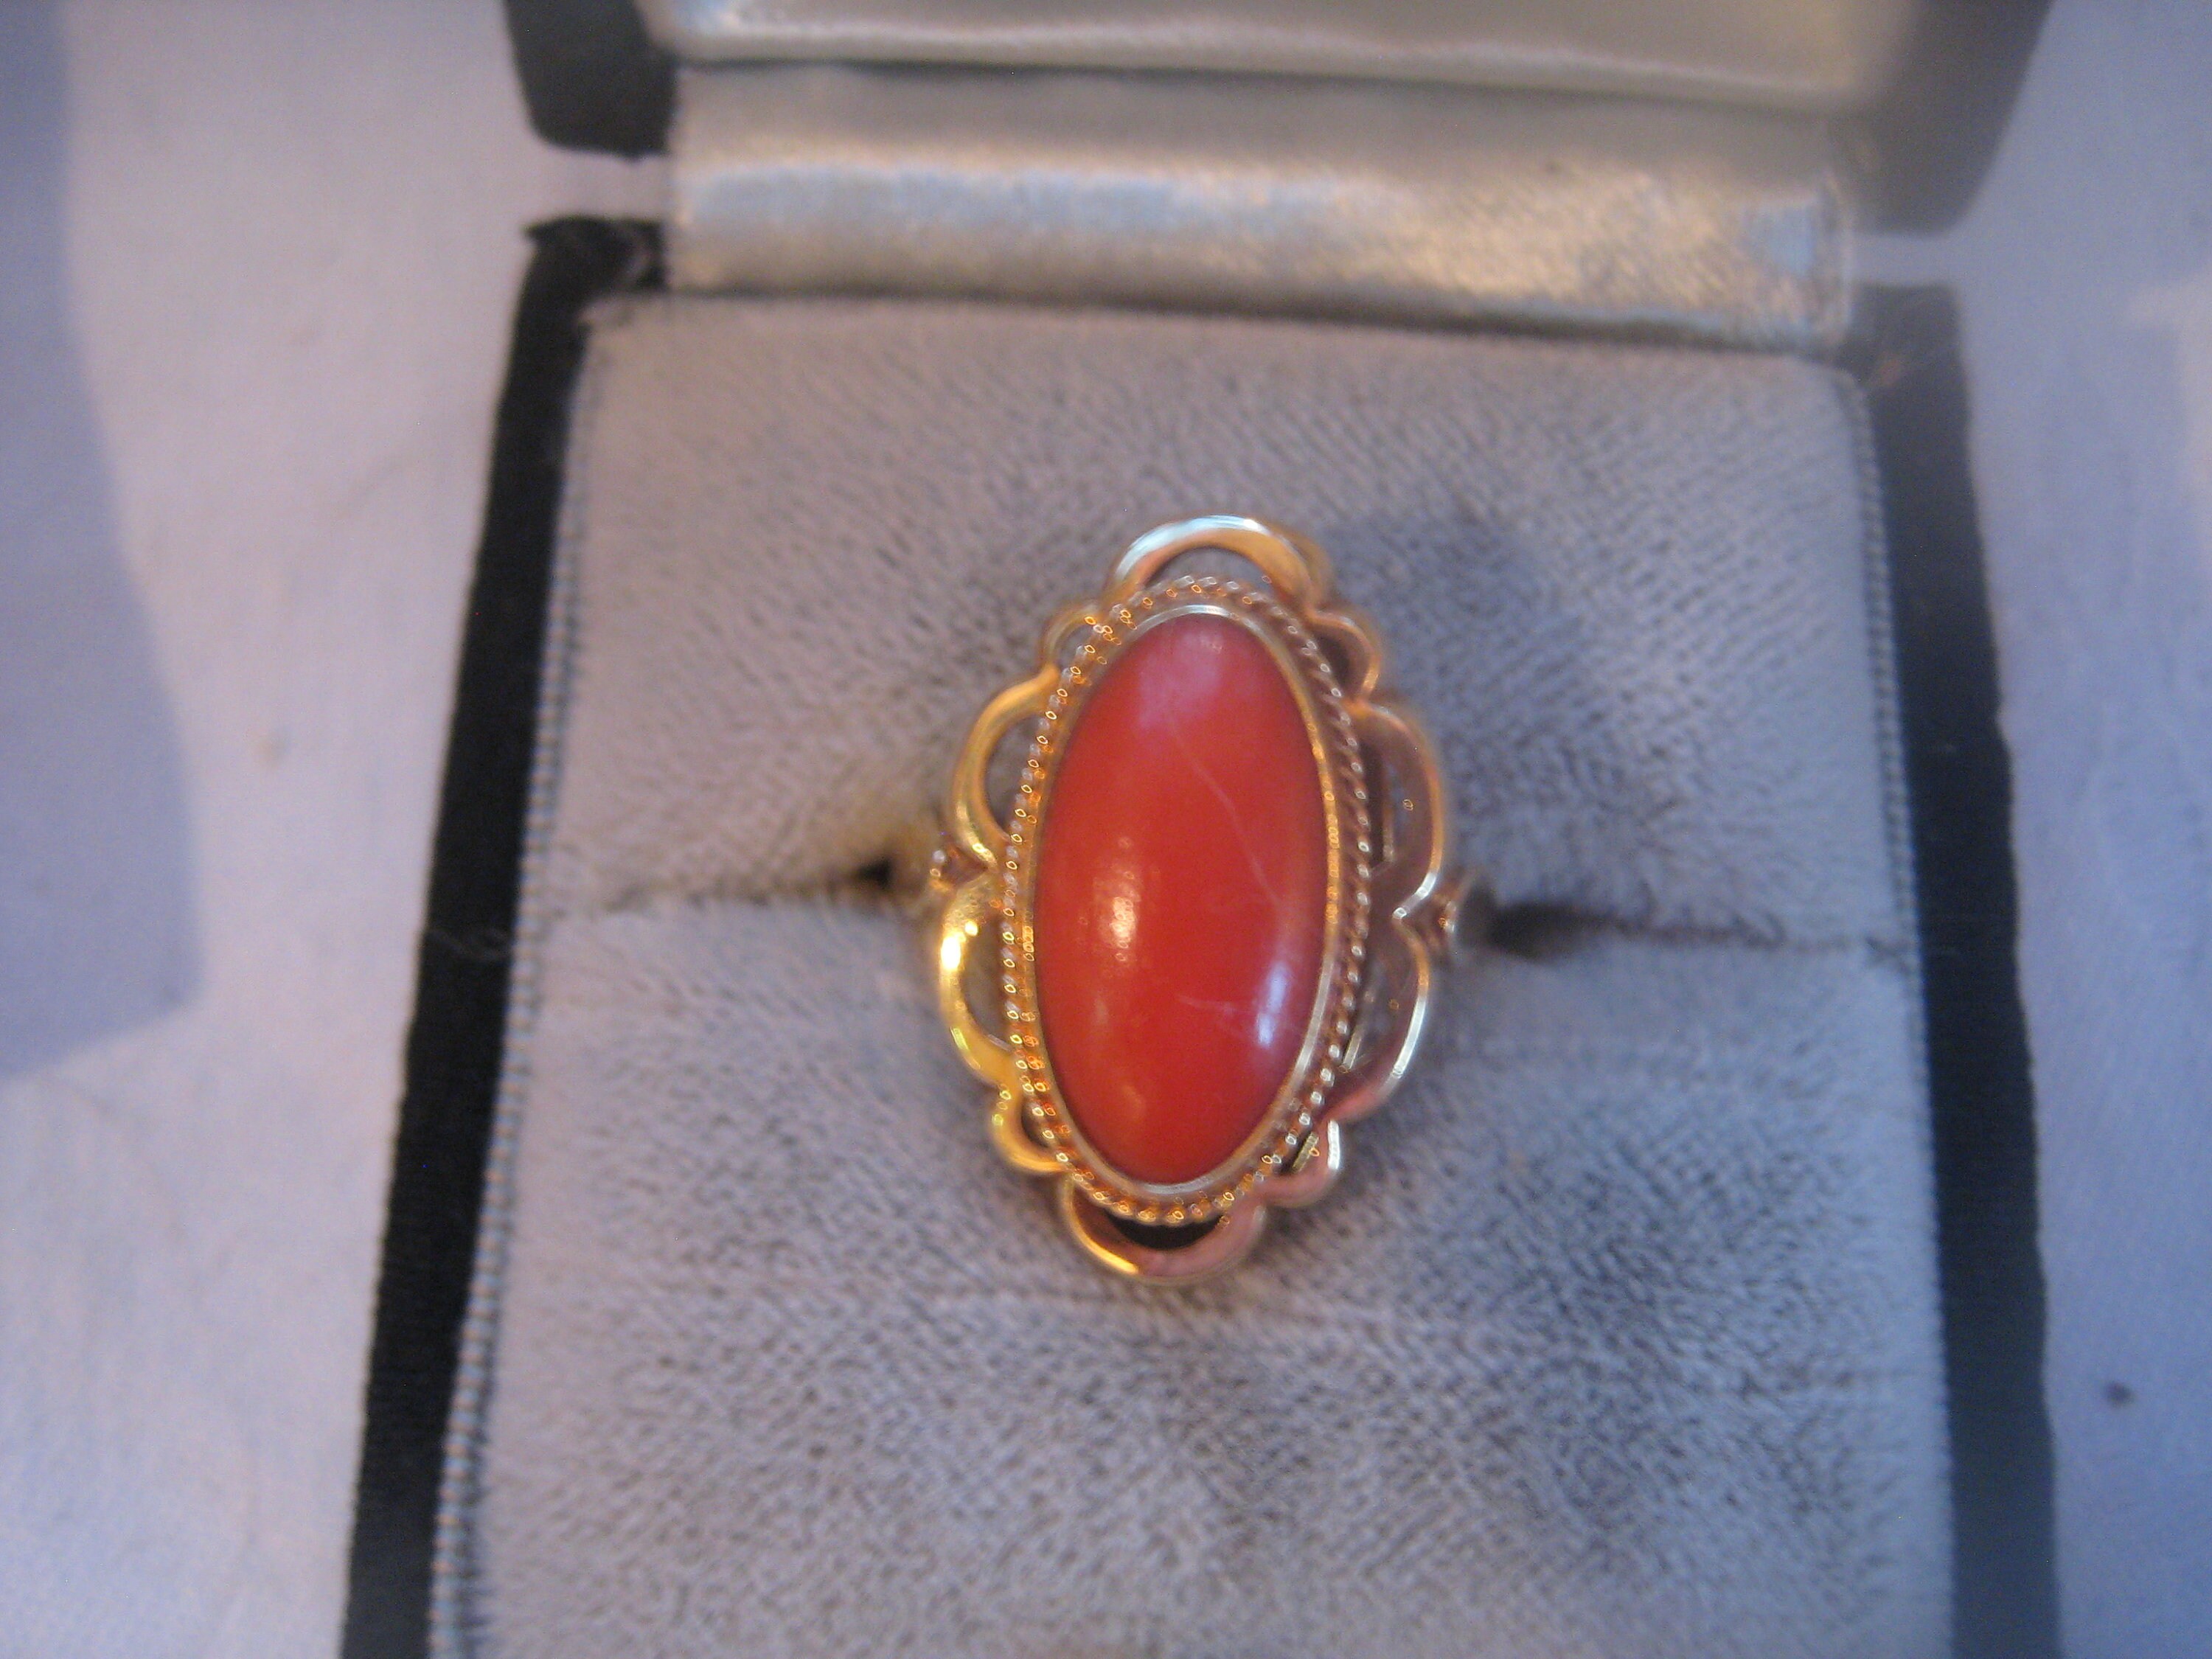 Special Offer Vintage Gold Ring Oval Cabochon Cut Coral - Etsy